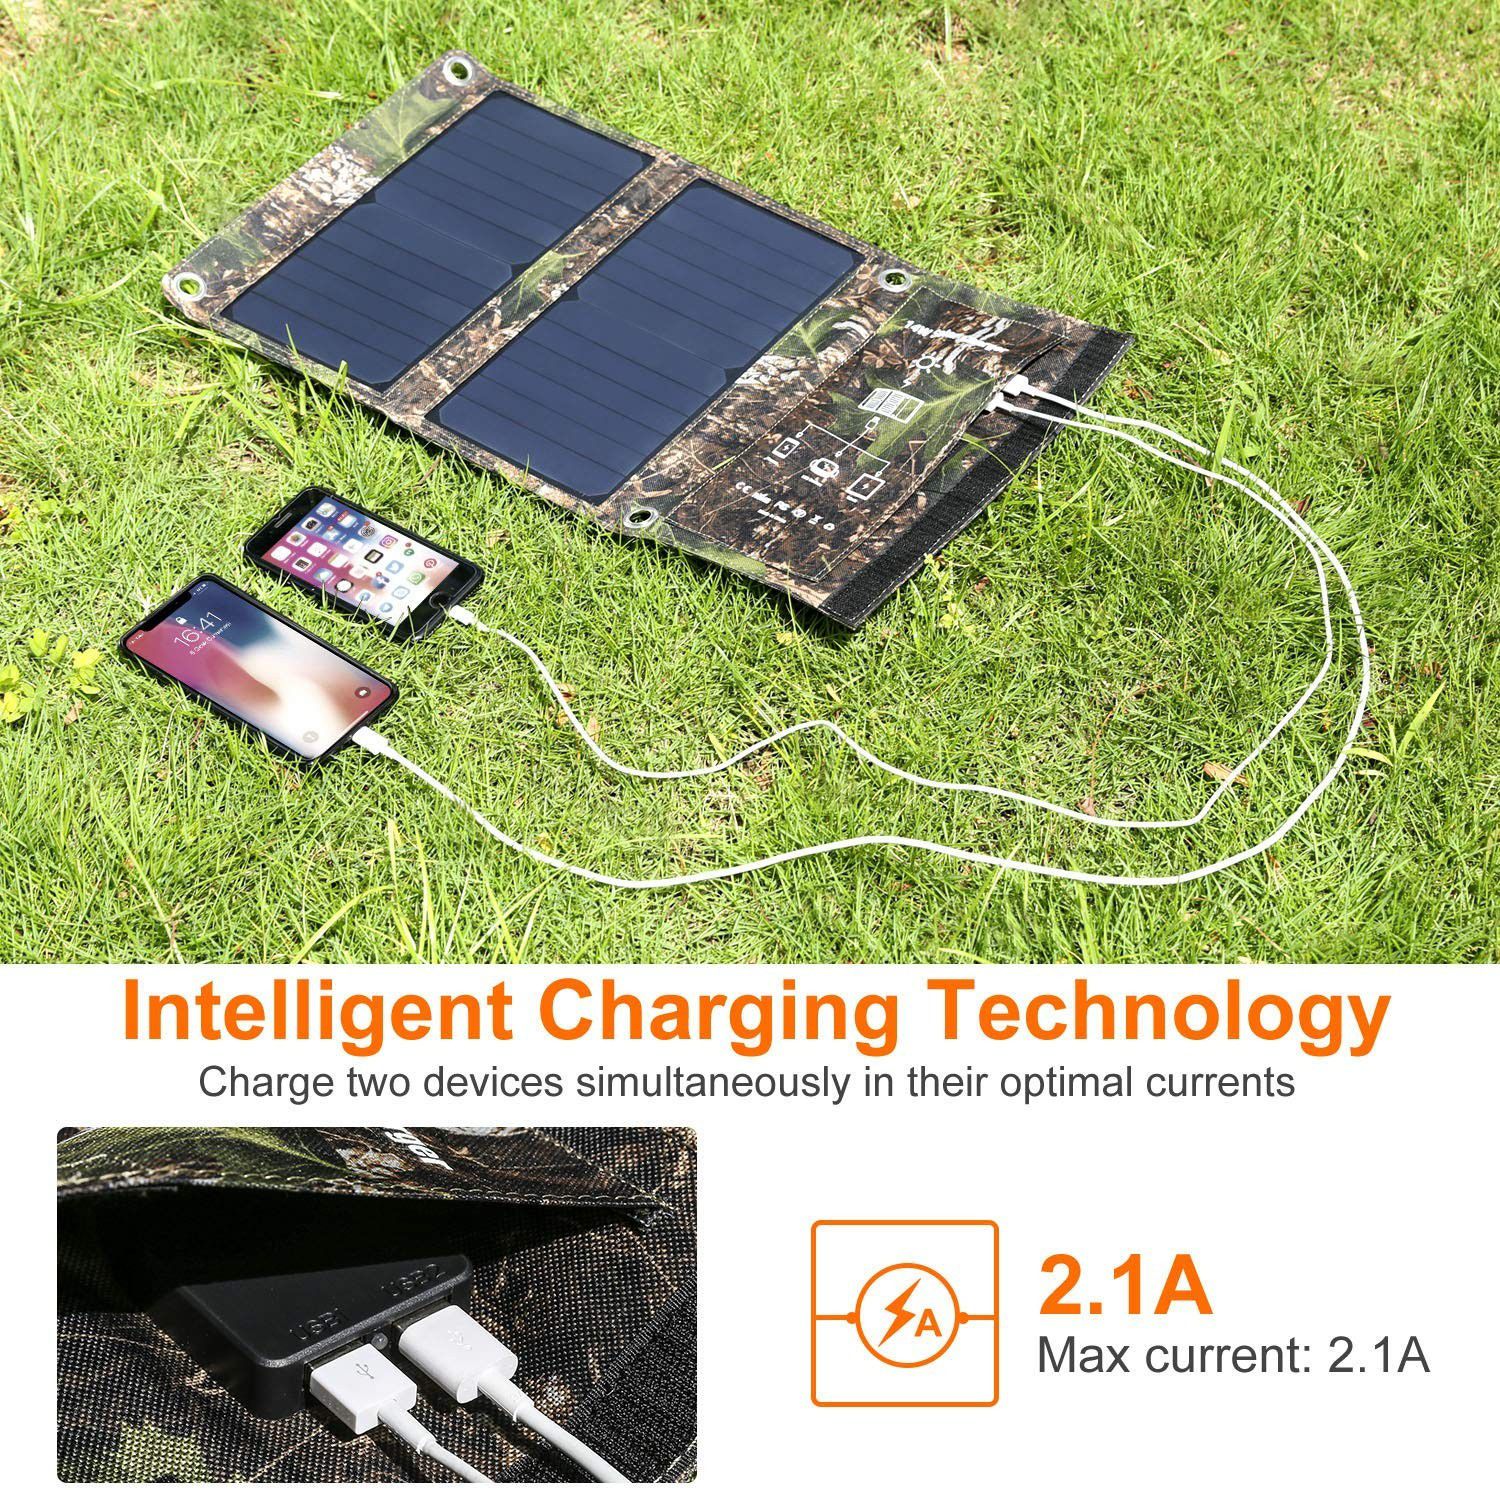 Dohiker 27W Solar Charger, Portable Solar Panel Foldable High Efficiency